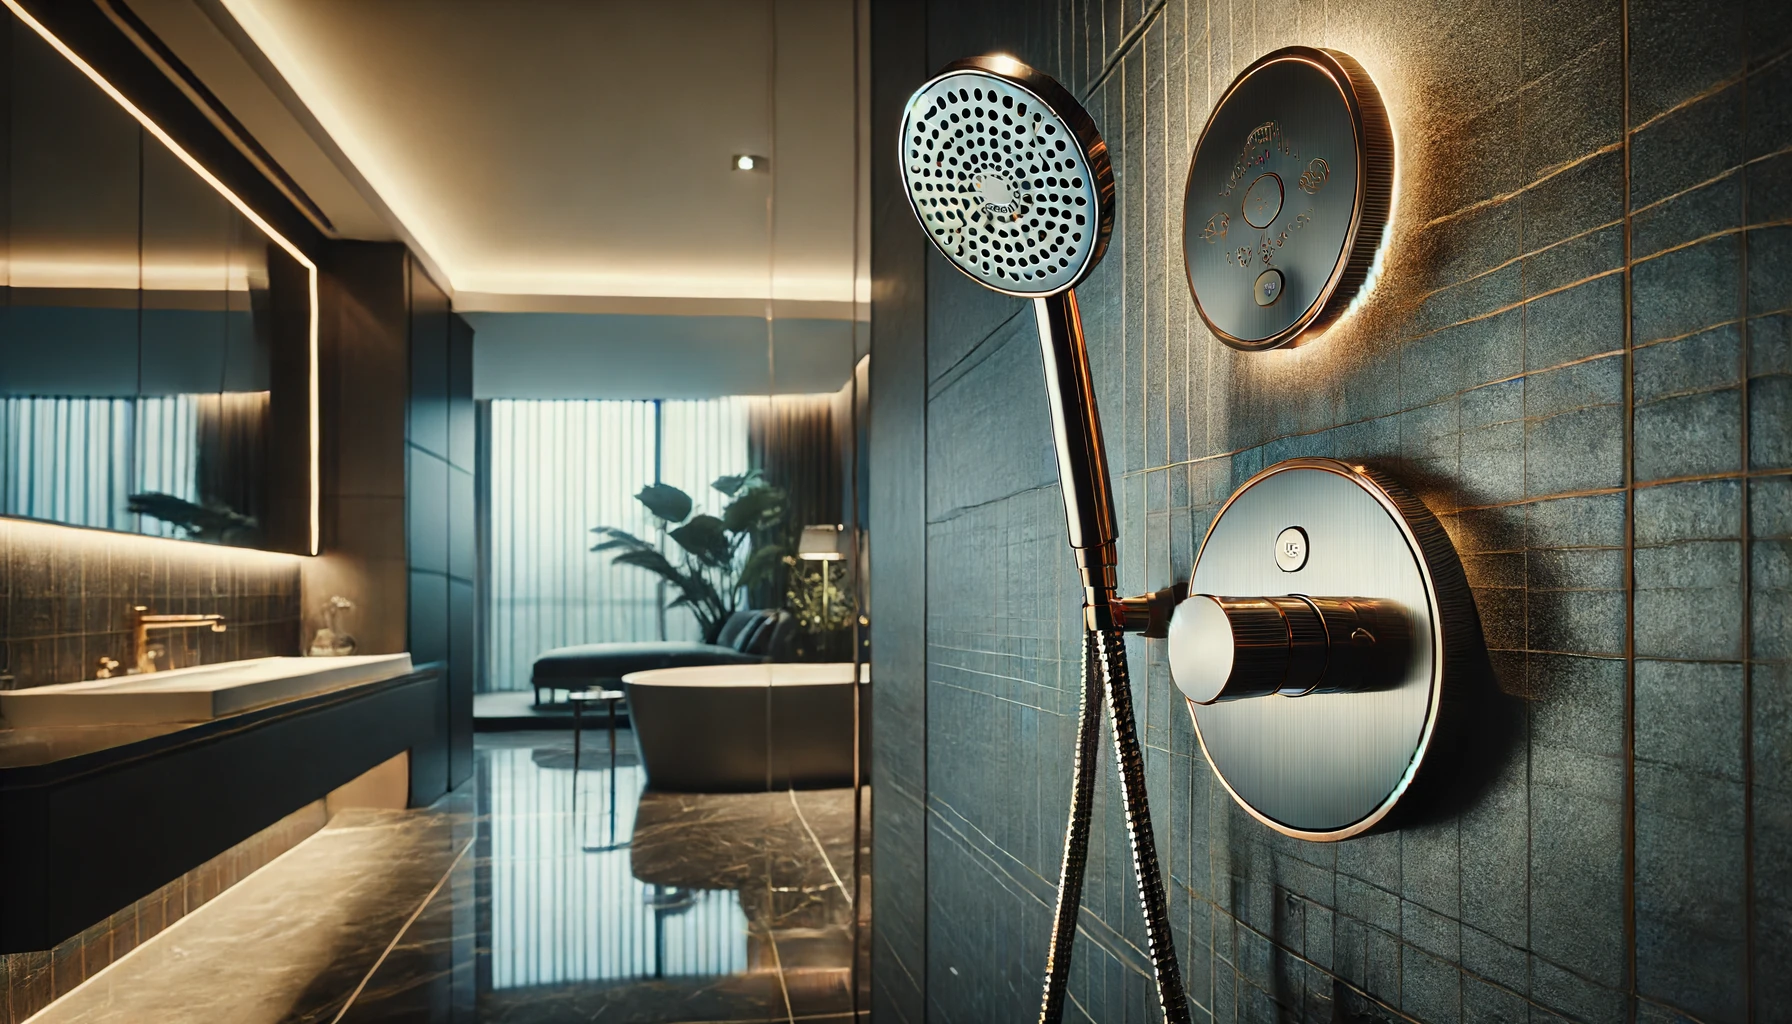 A luxurious handheld shower head installed in a modern, elegant bathroom with sleek tiles and ambient lighting. The focus is on the high-end design and quality of the shower head, highlighting its attractiveness.